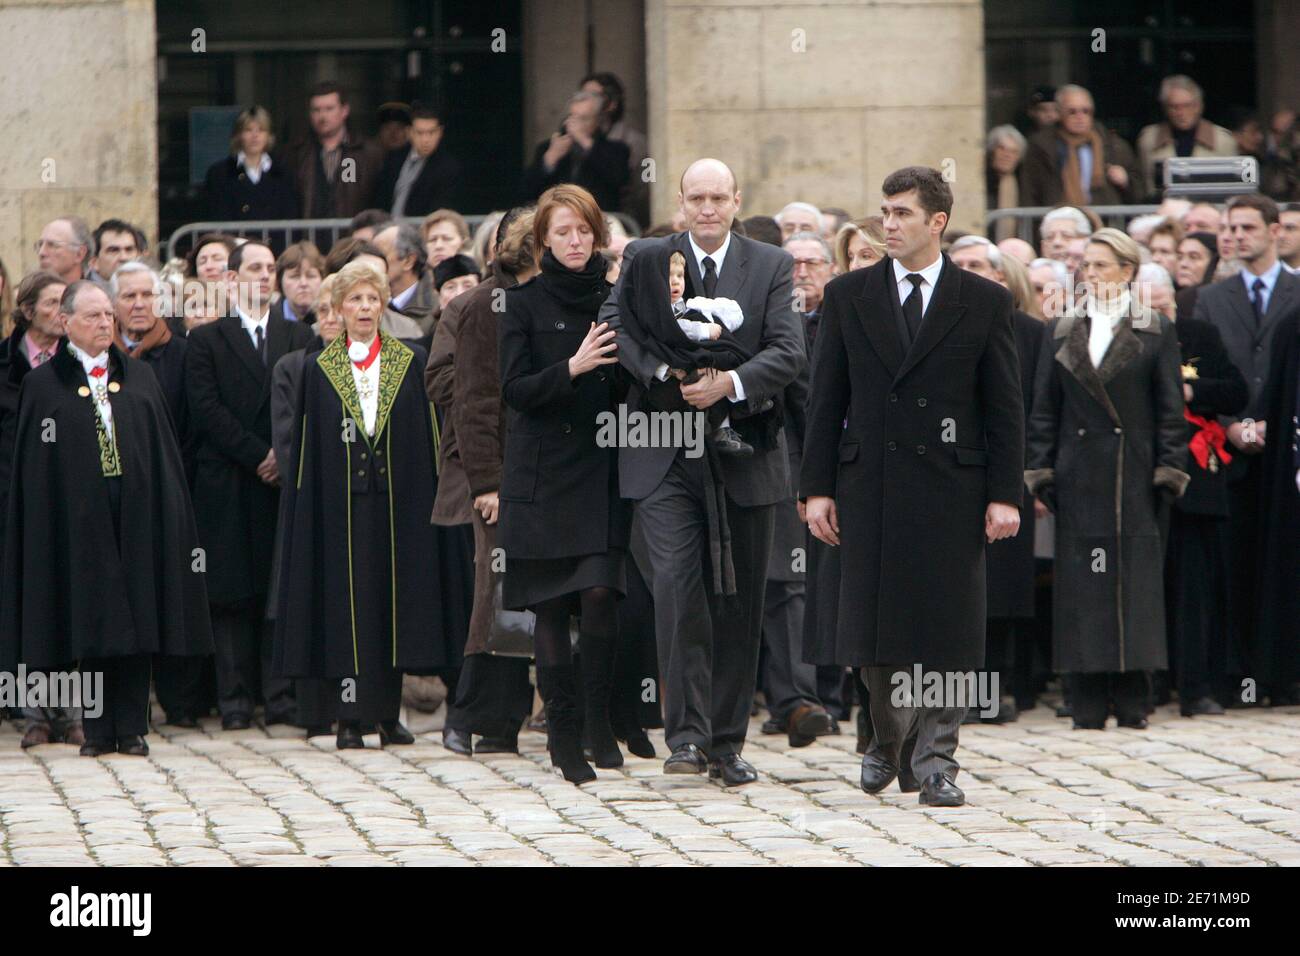 Deniau's family attend the official funerals of Jean-Francois Deniau during  a ceremony at the Invalides in Paris, France, on January 29, 2007. Jean-Francois  Deniau was Former French minister, writer and human rights